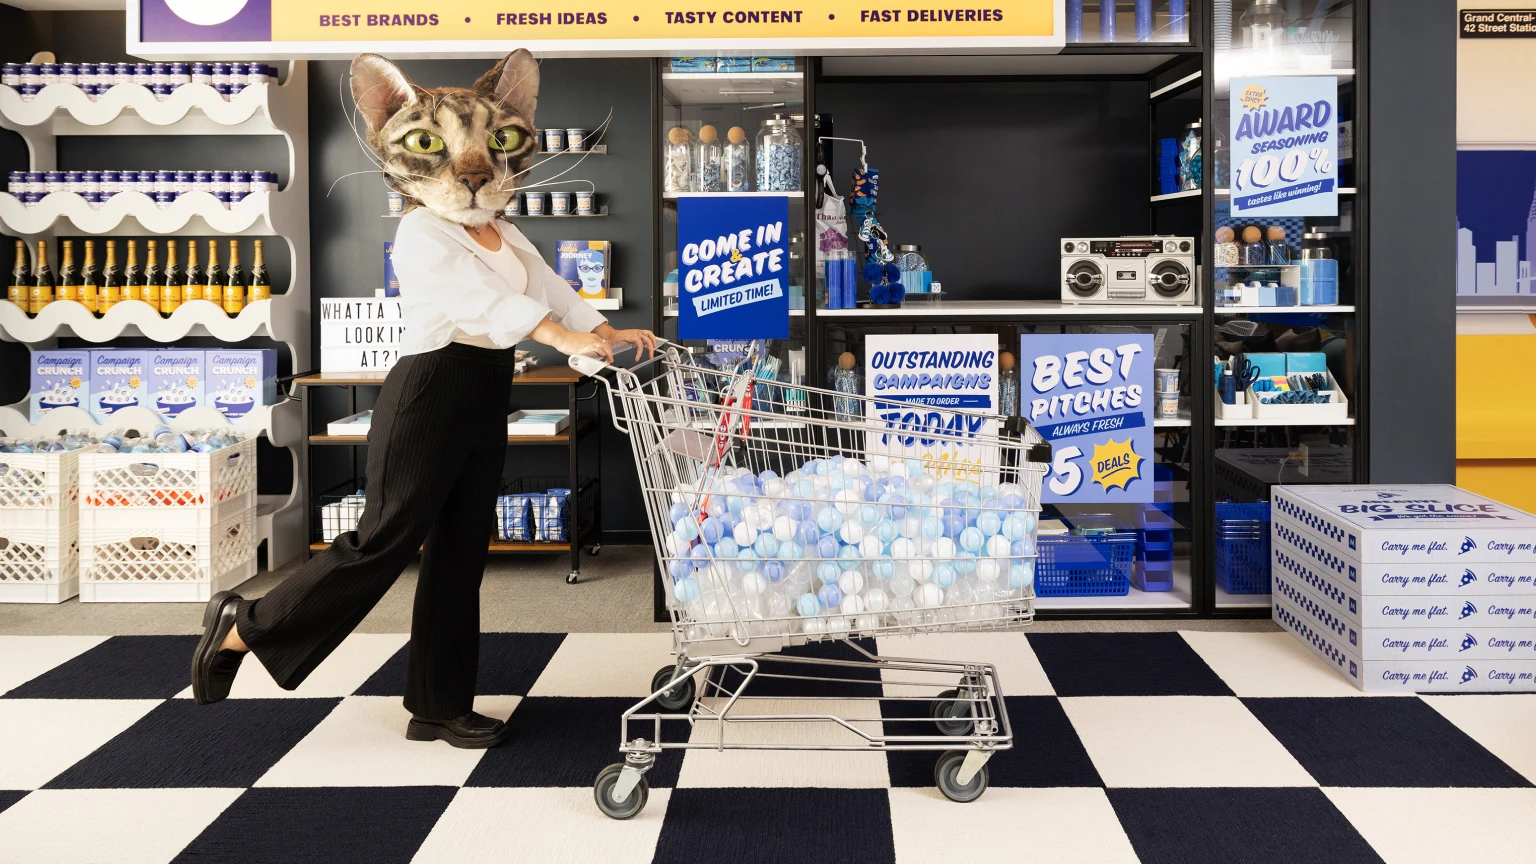 Person wearing a giant cat head pushing a shopping cart through a bodega-inspired boardroom.